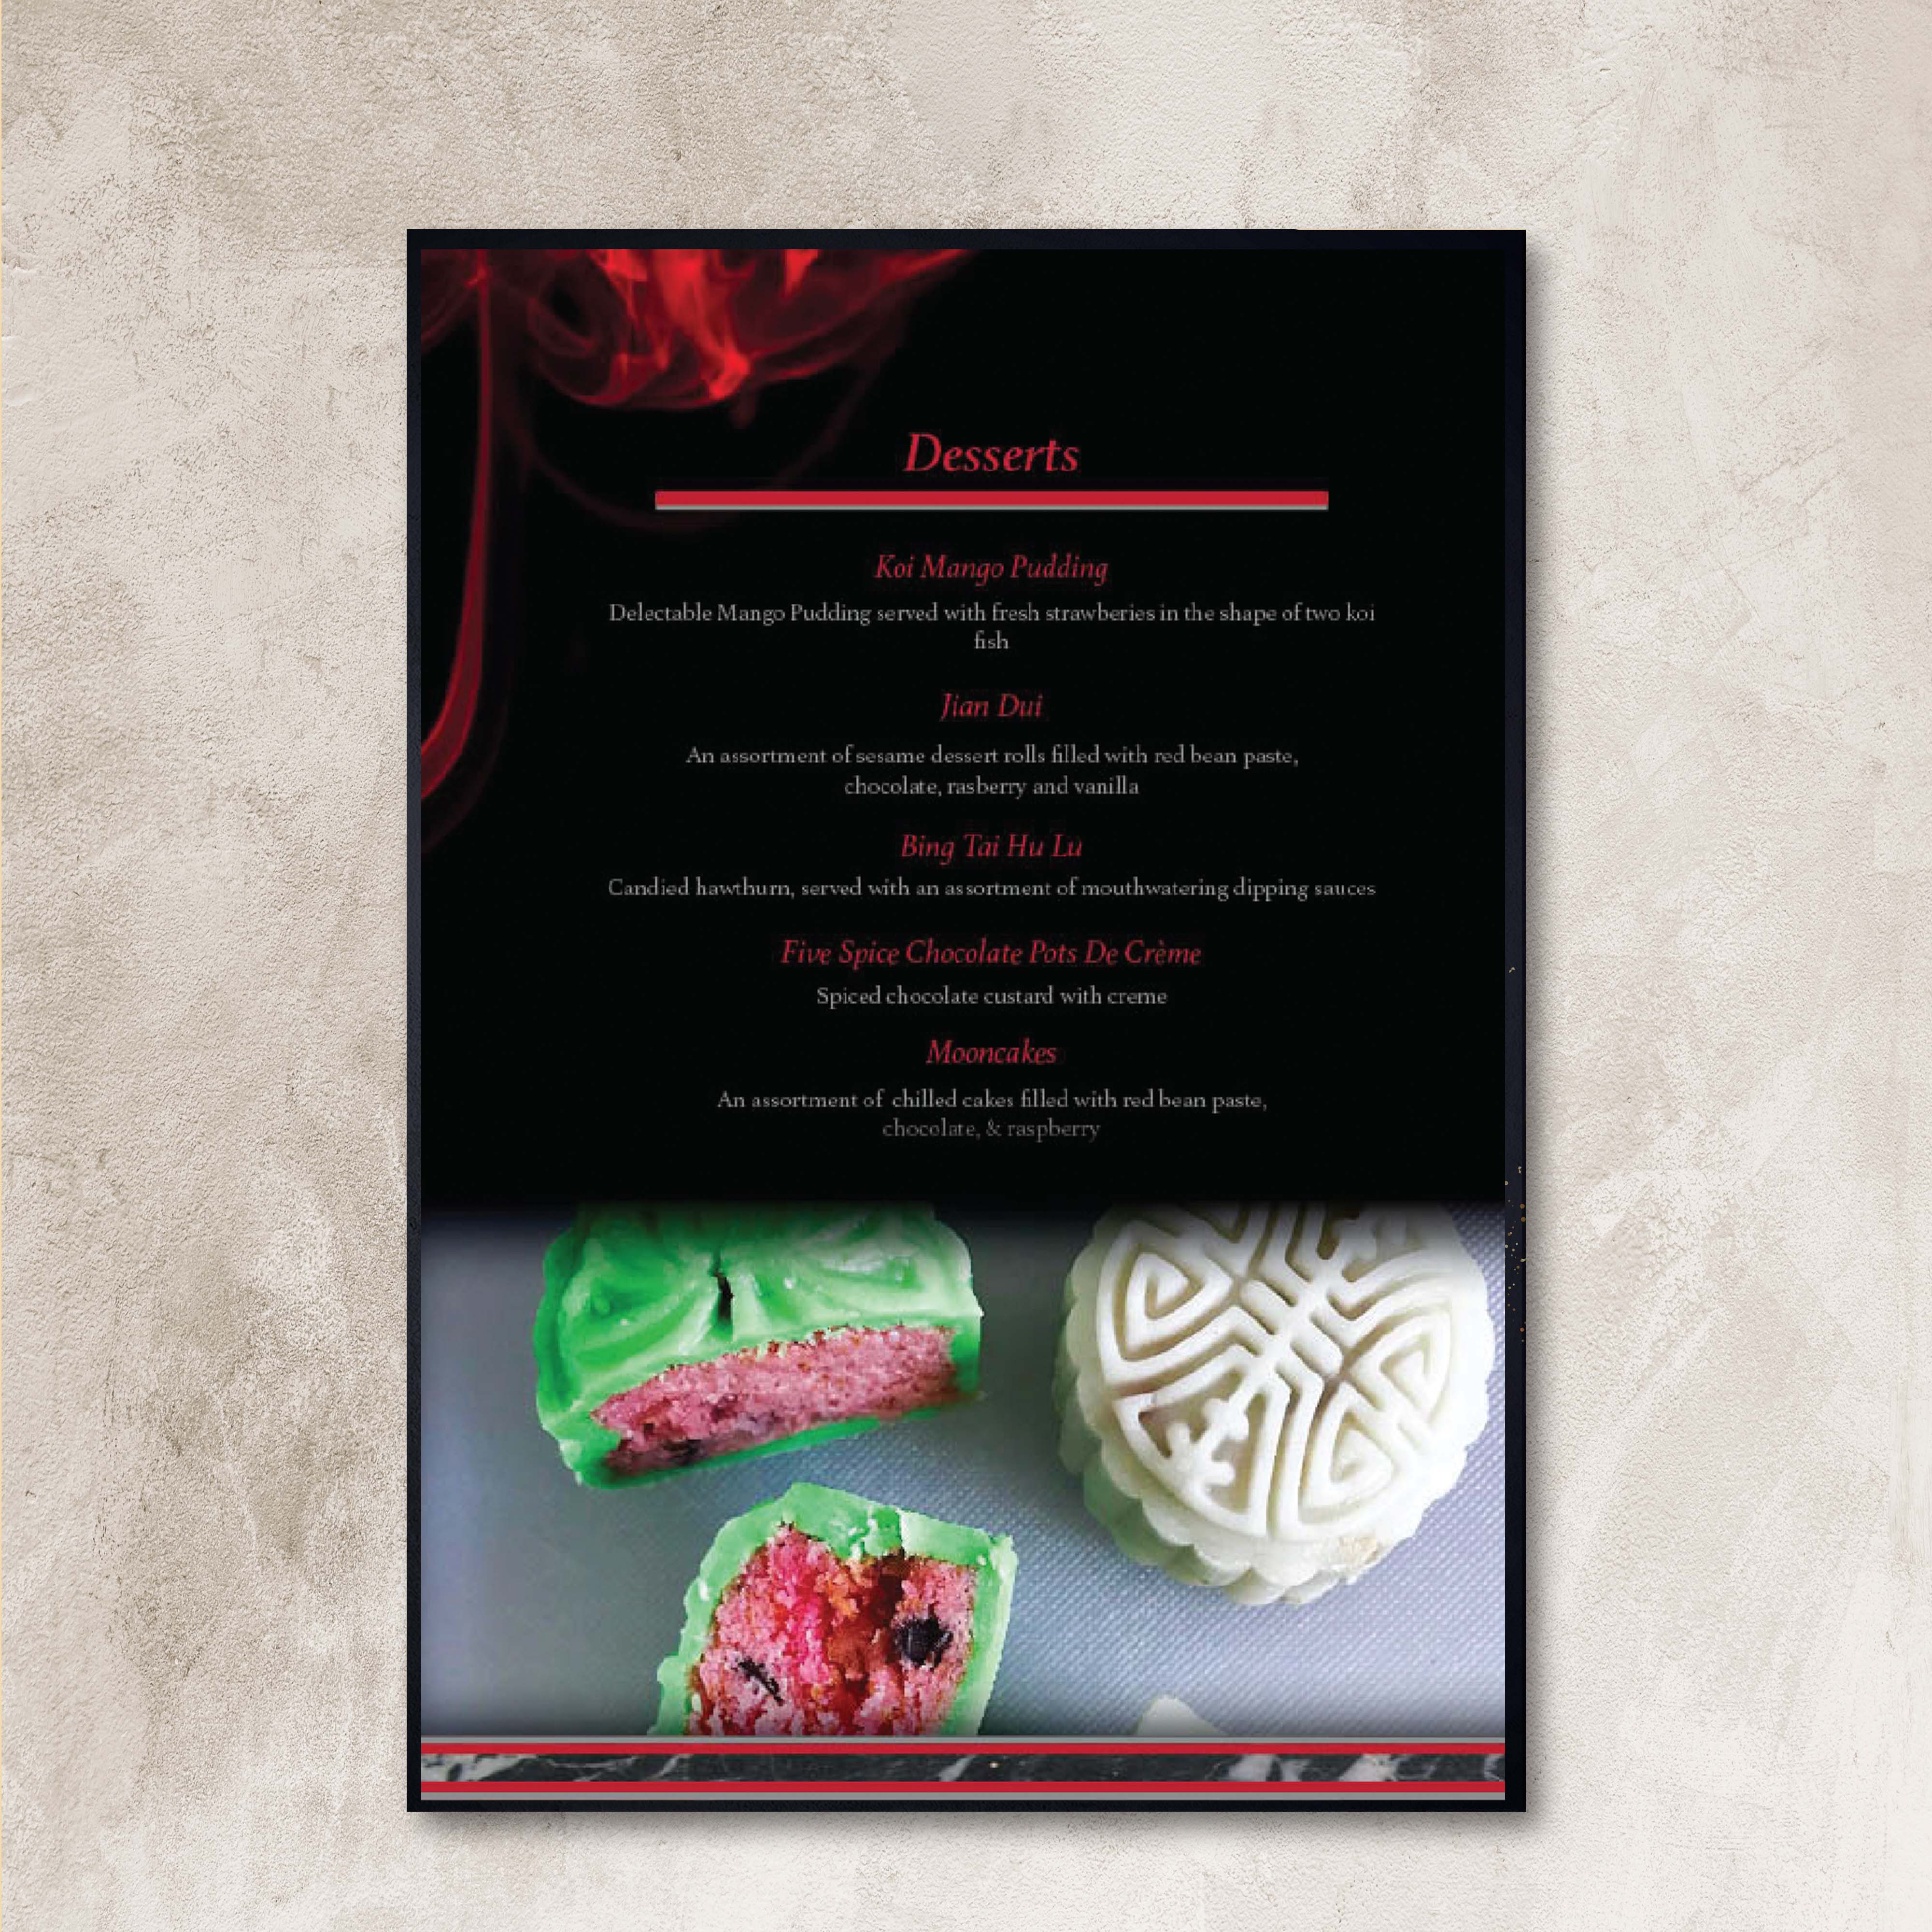 Back of a menu on a white marble table next to a knife, displaying the dessert menu with an image of a mooncake.